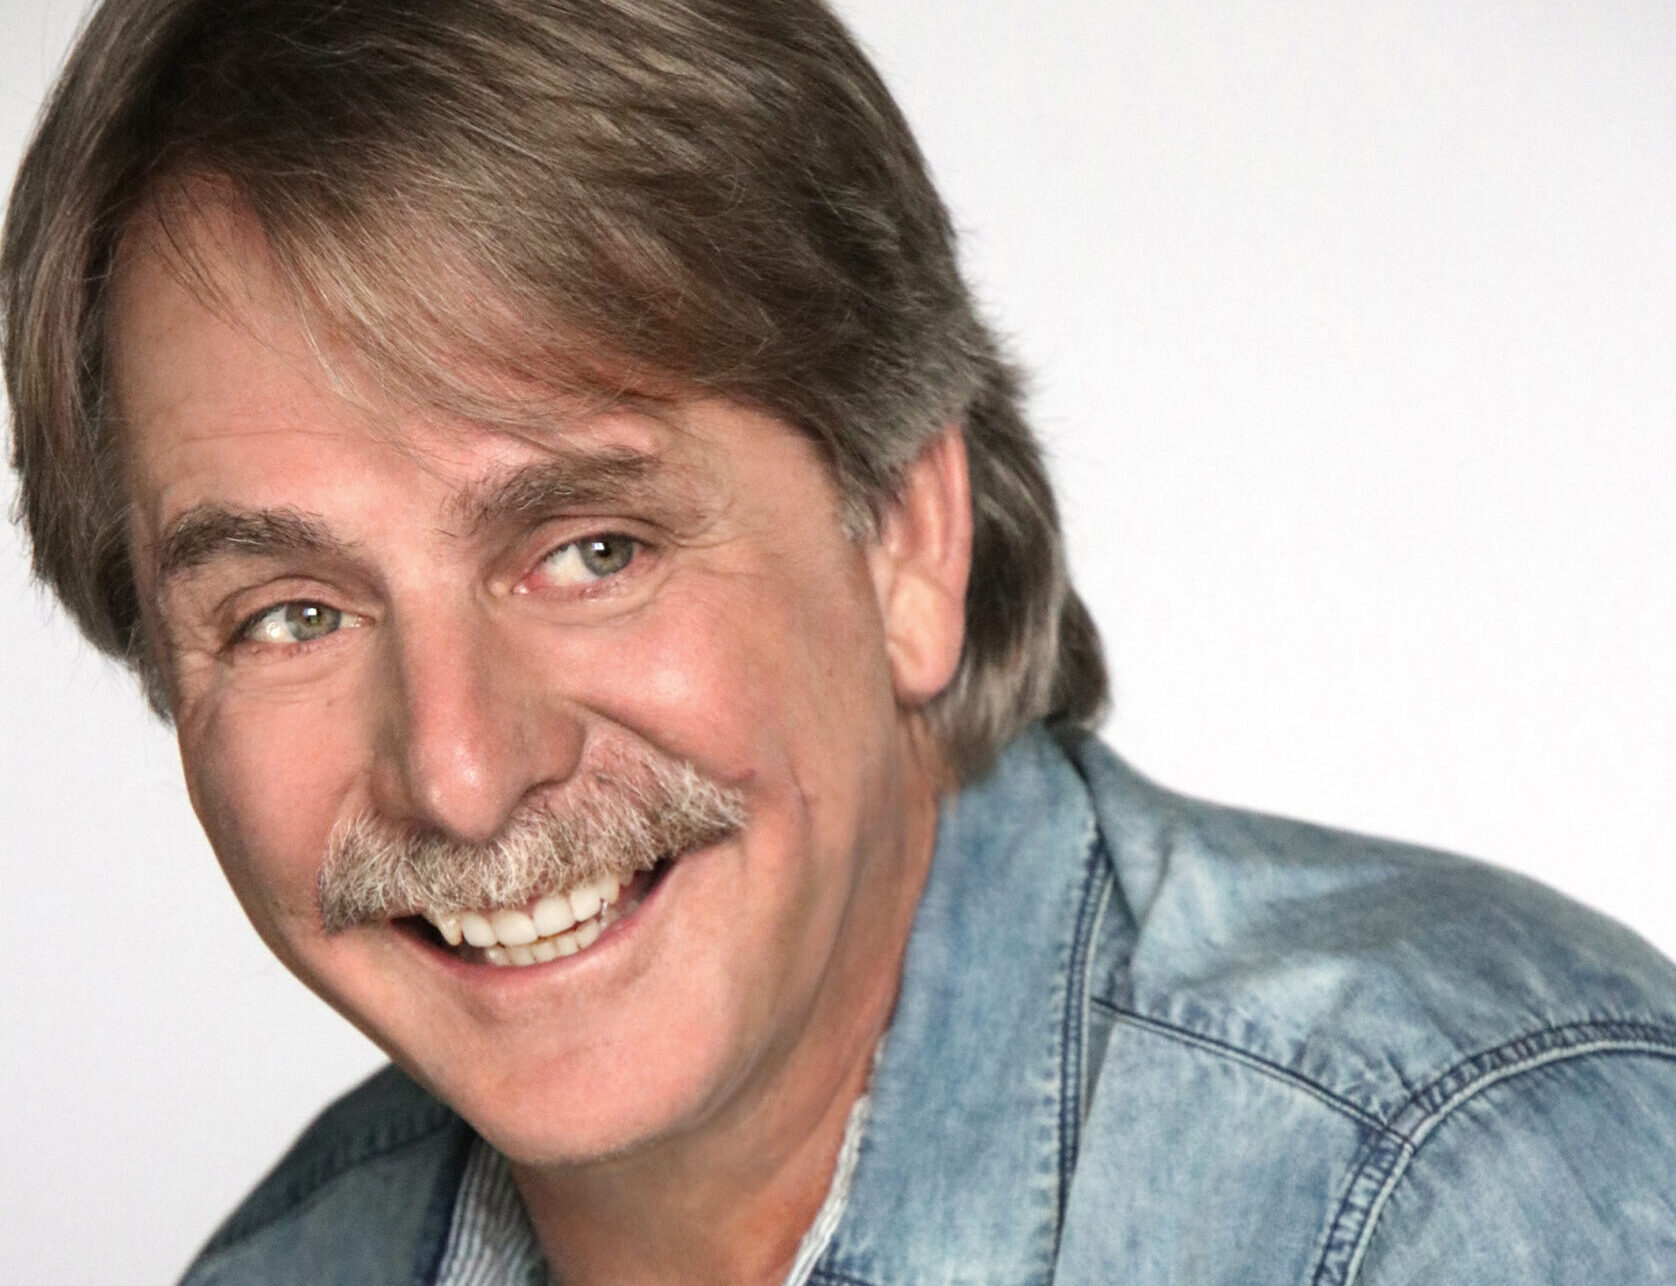 Jeff Foxworthy to bring the laughs to AMS pre-race March 21